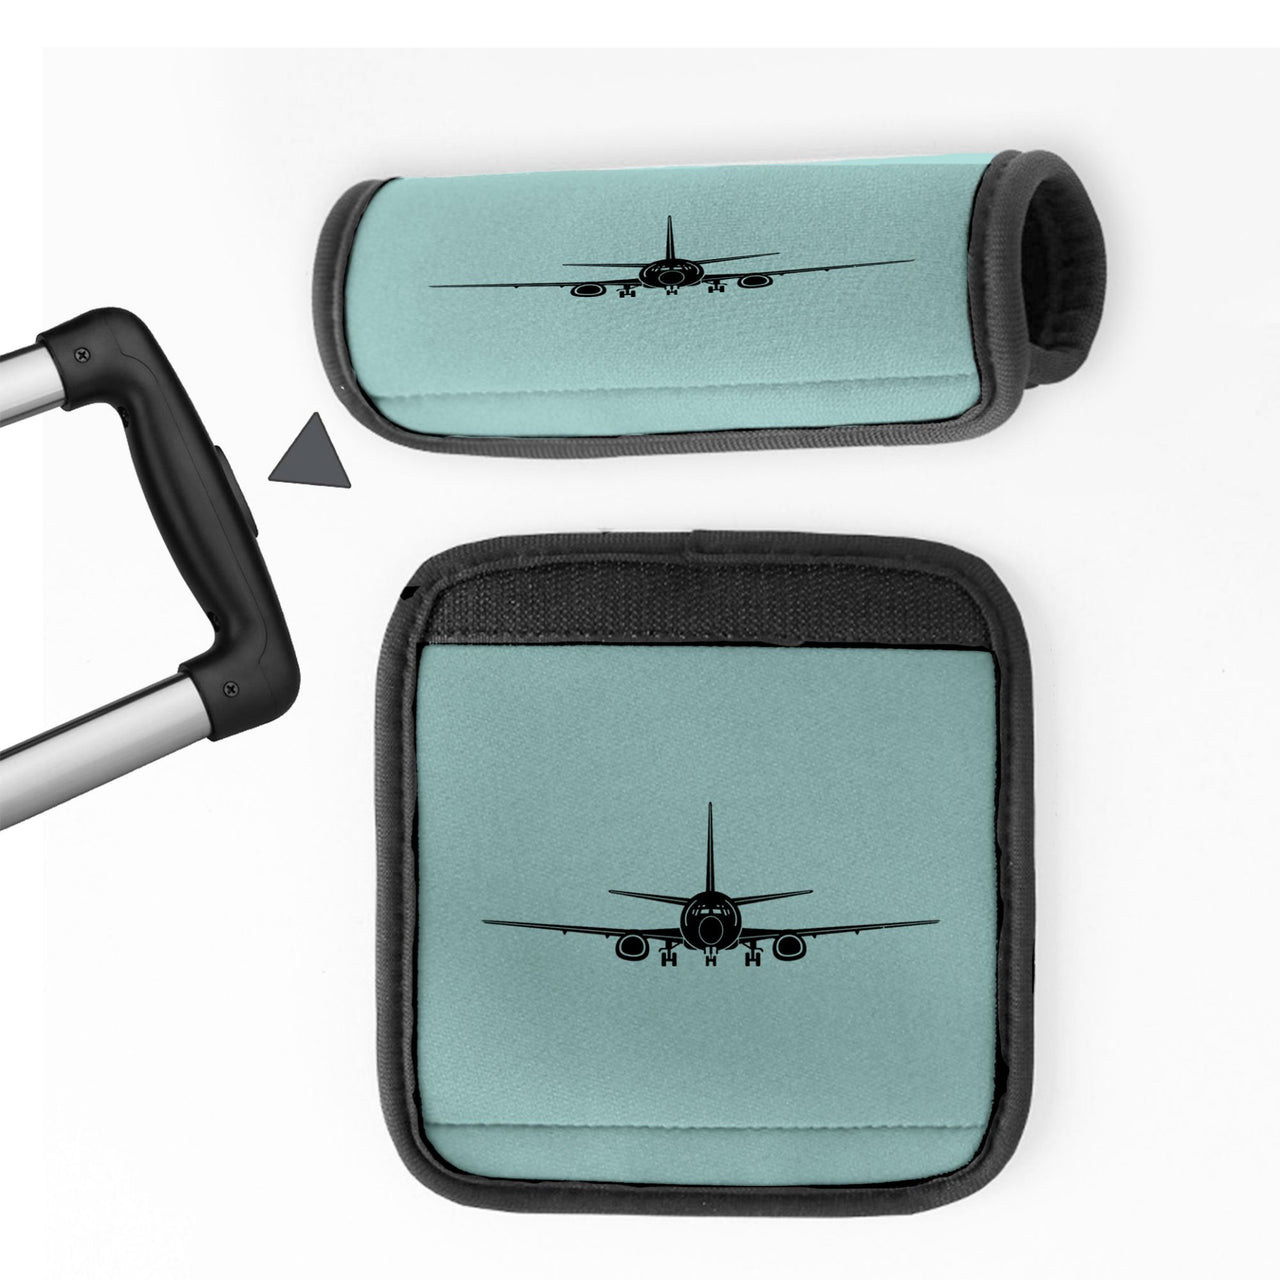 Boeing 737 Silhouette Designed Neoprene Luggage Handle Covers